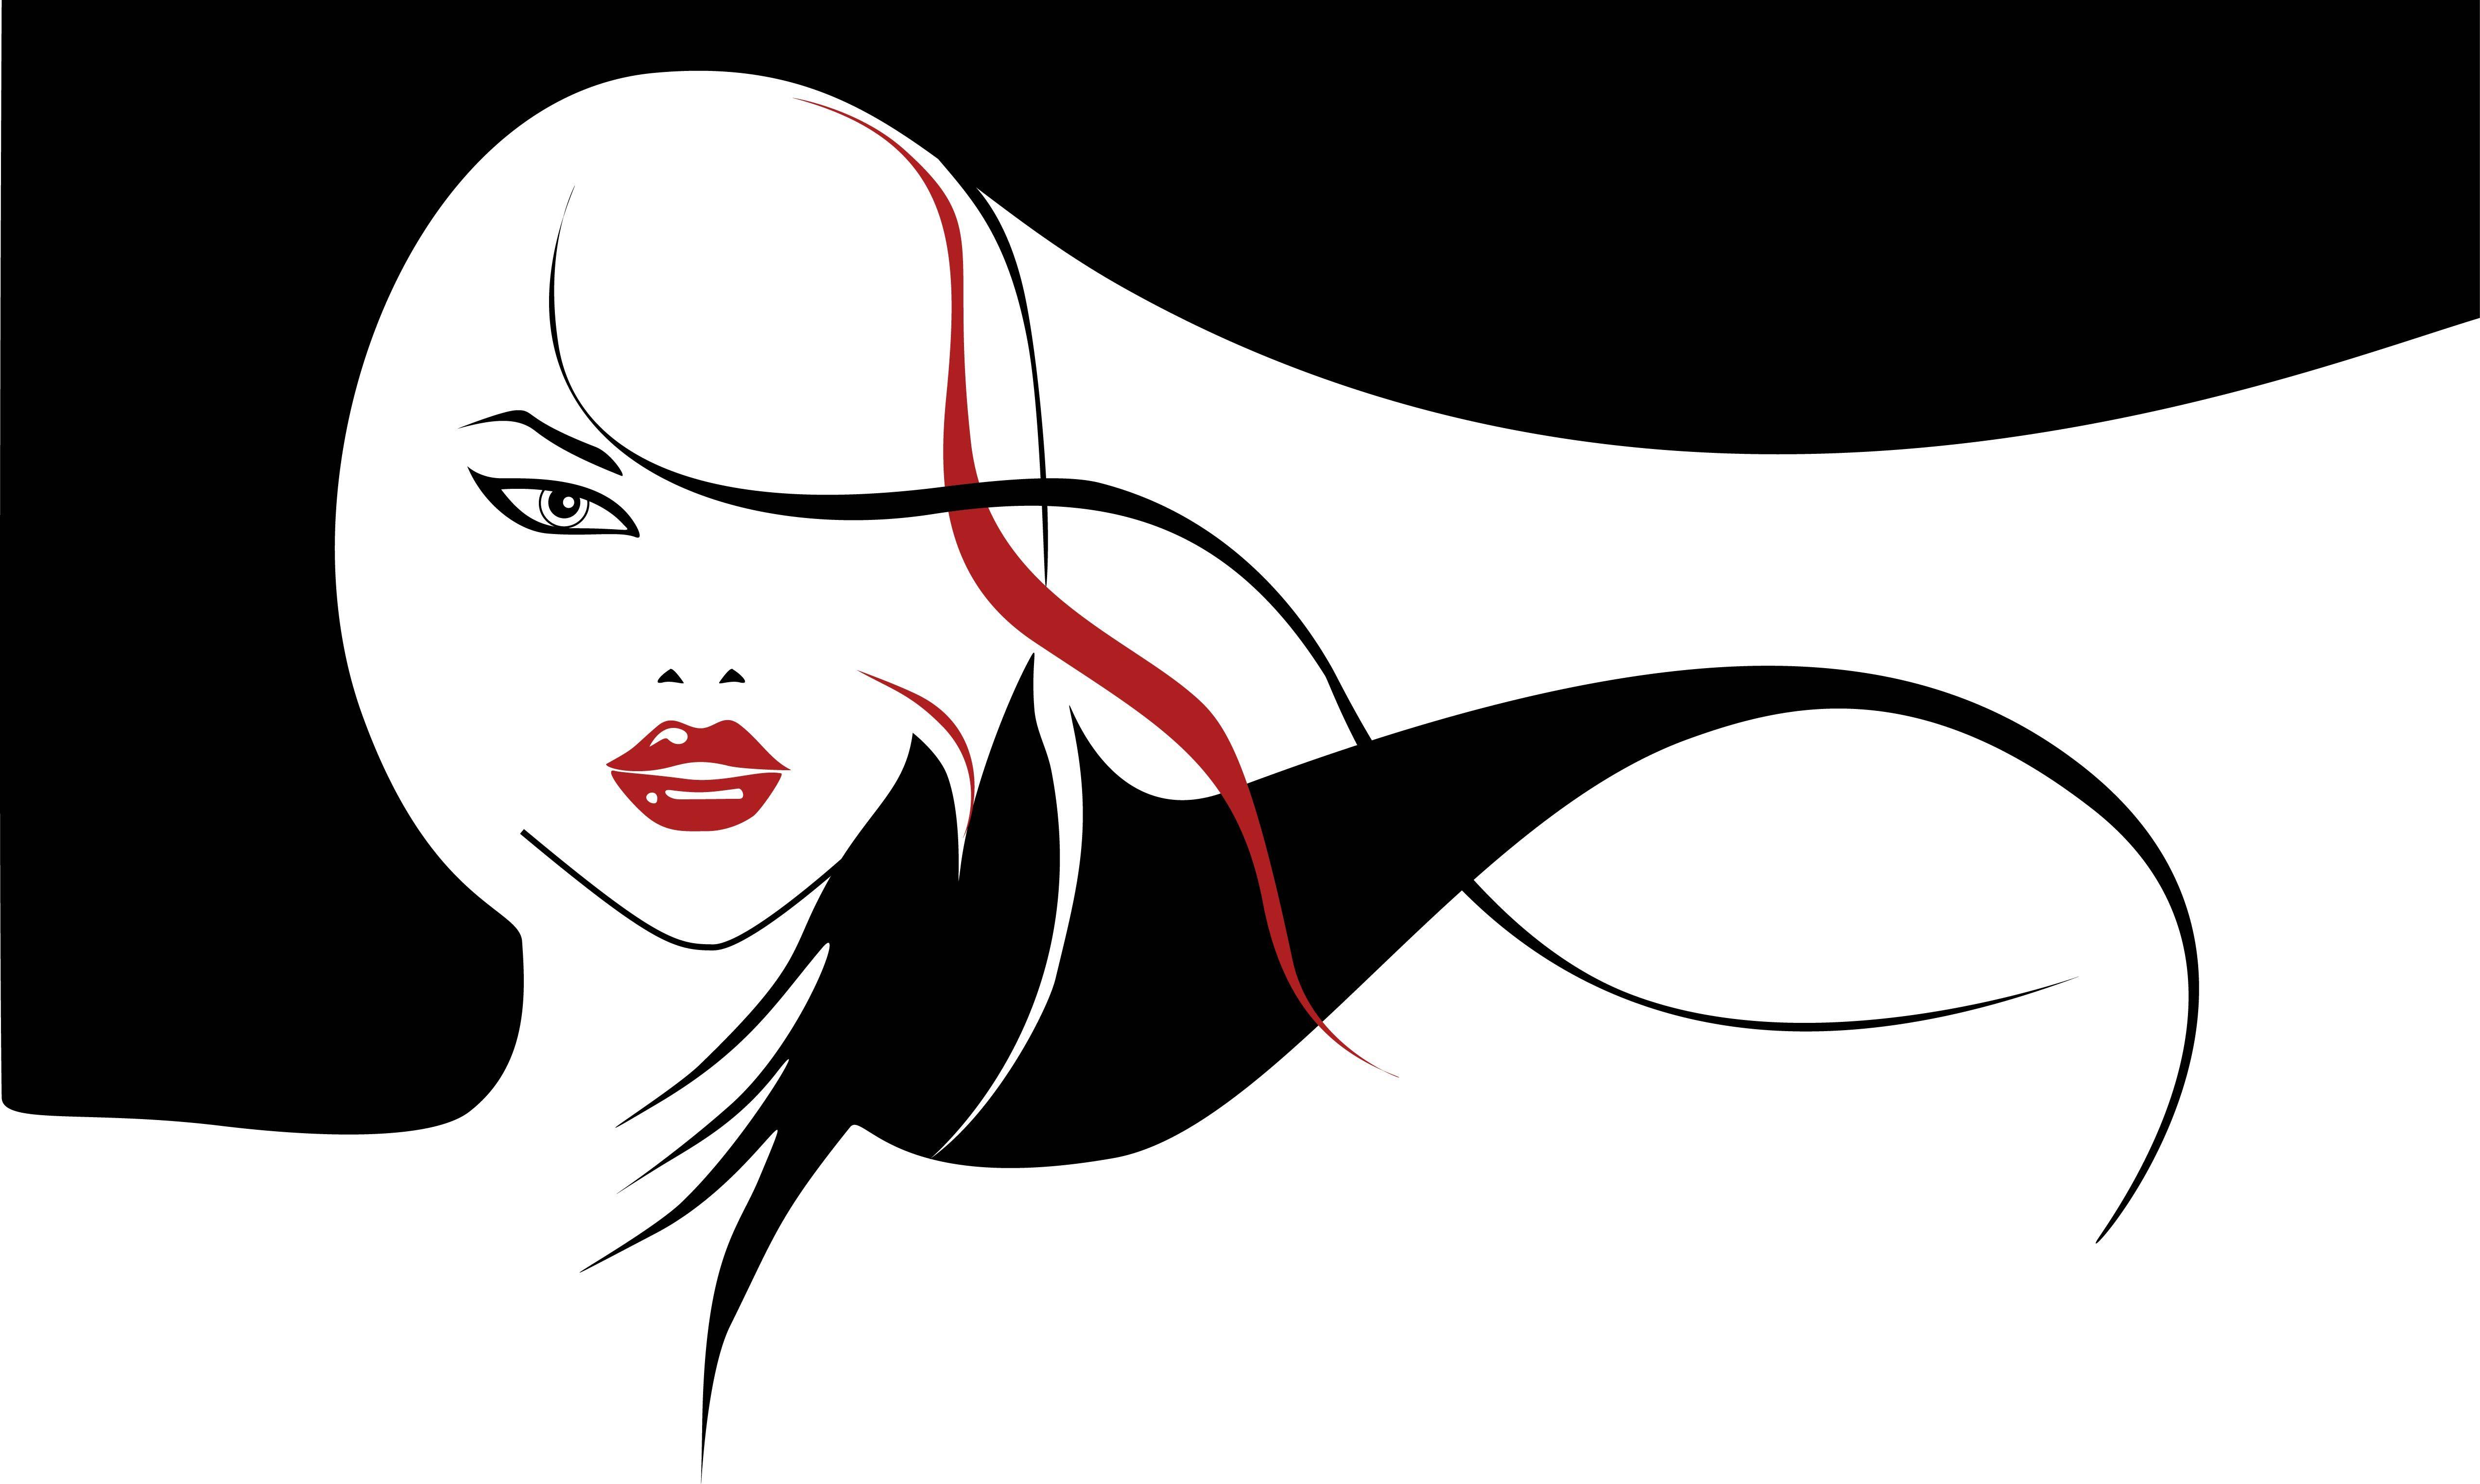 Girl with Flowing Hair Logo - Black and white girl